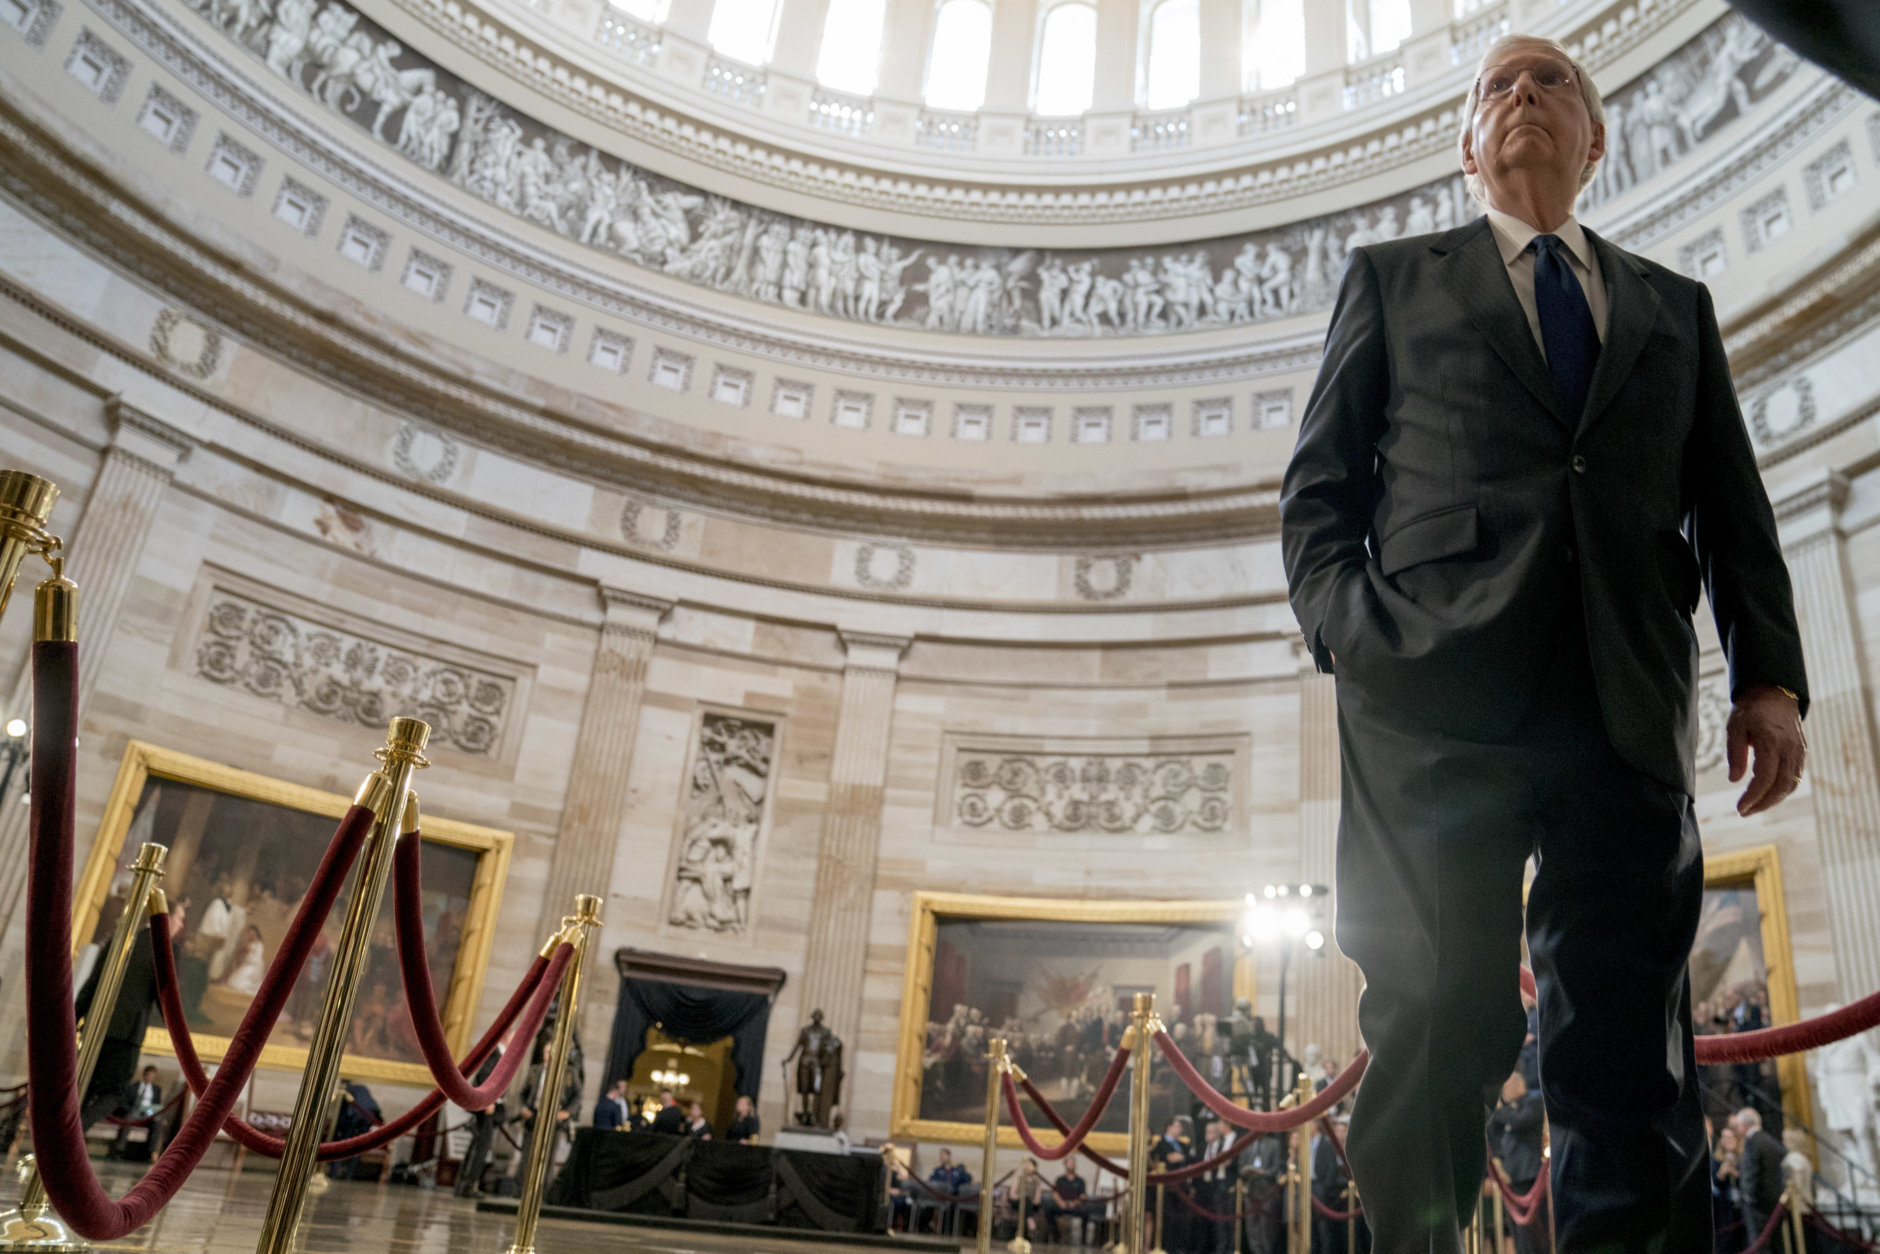 Senate Majority Leader Mitch McConnell of Ky., walks through the Rotunda before the casket of Sen. John McCain, R-Ariz., lies in state at the U.S. Capitol, Friday, Aug. 31, 2018, in Washington. (AP Photo/Andrew Harnik, Pool)